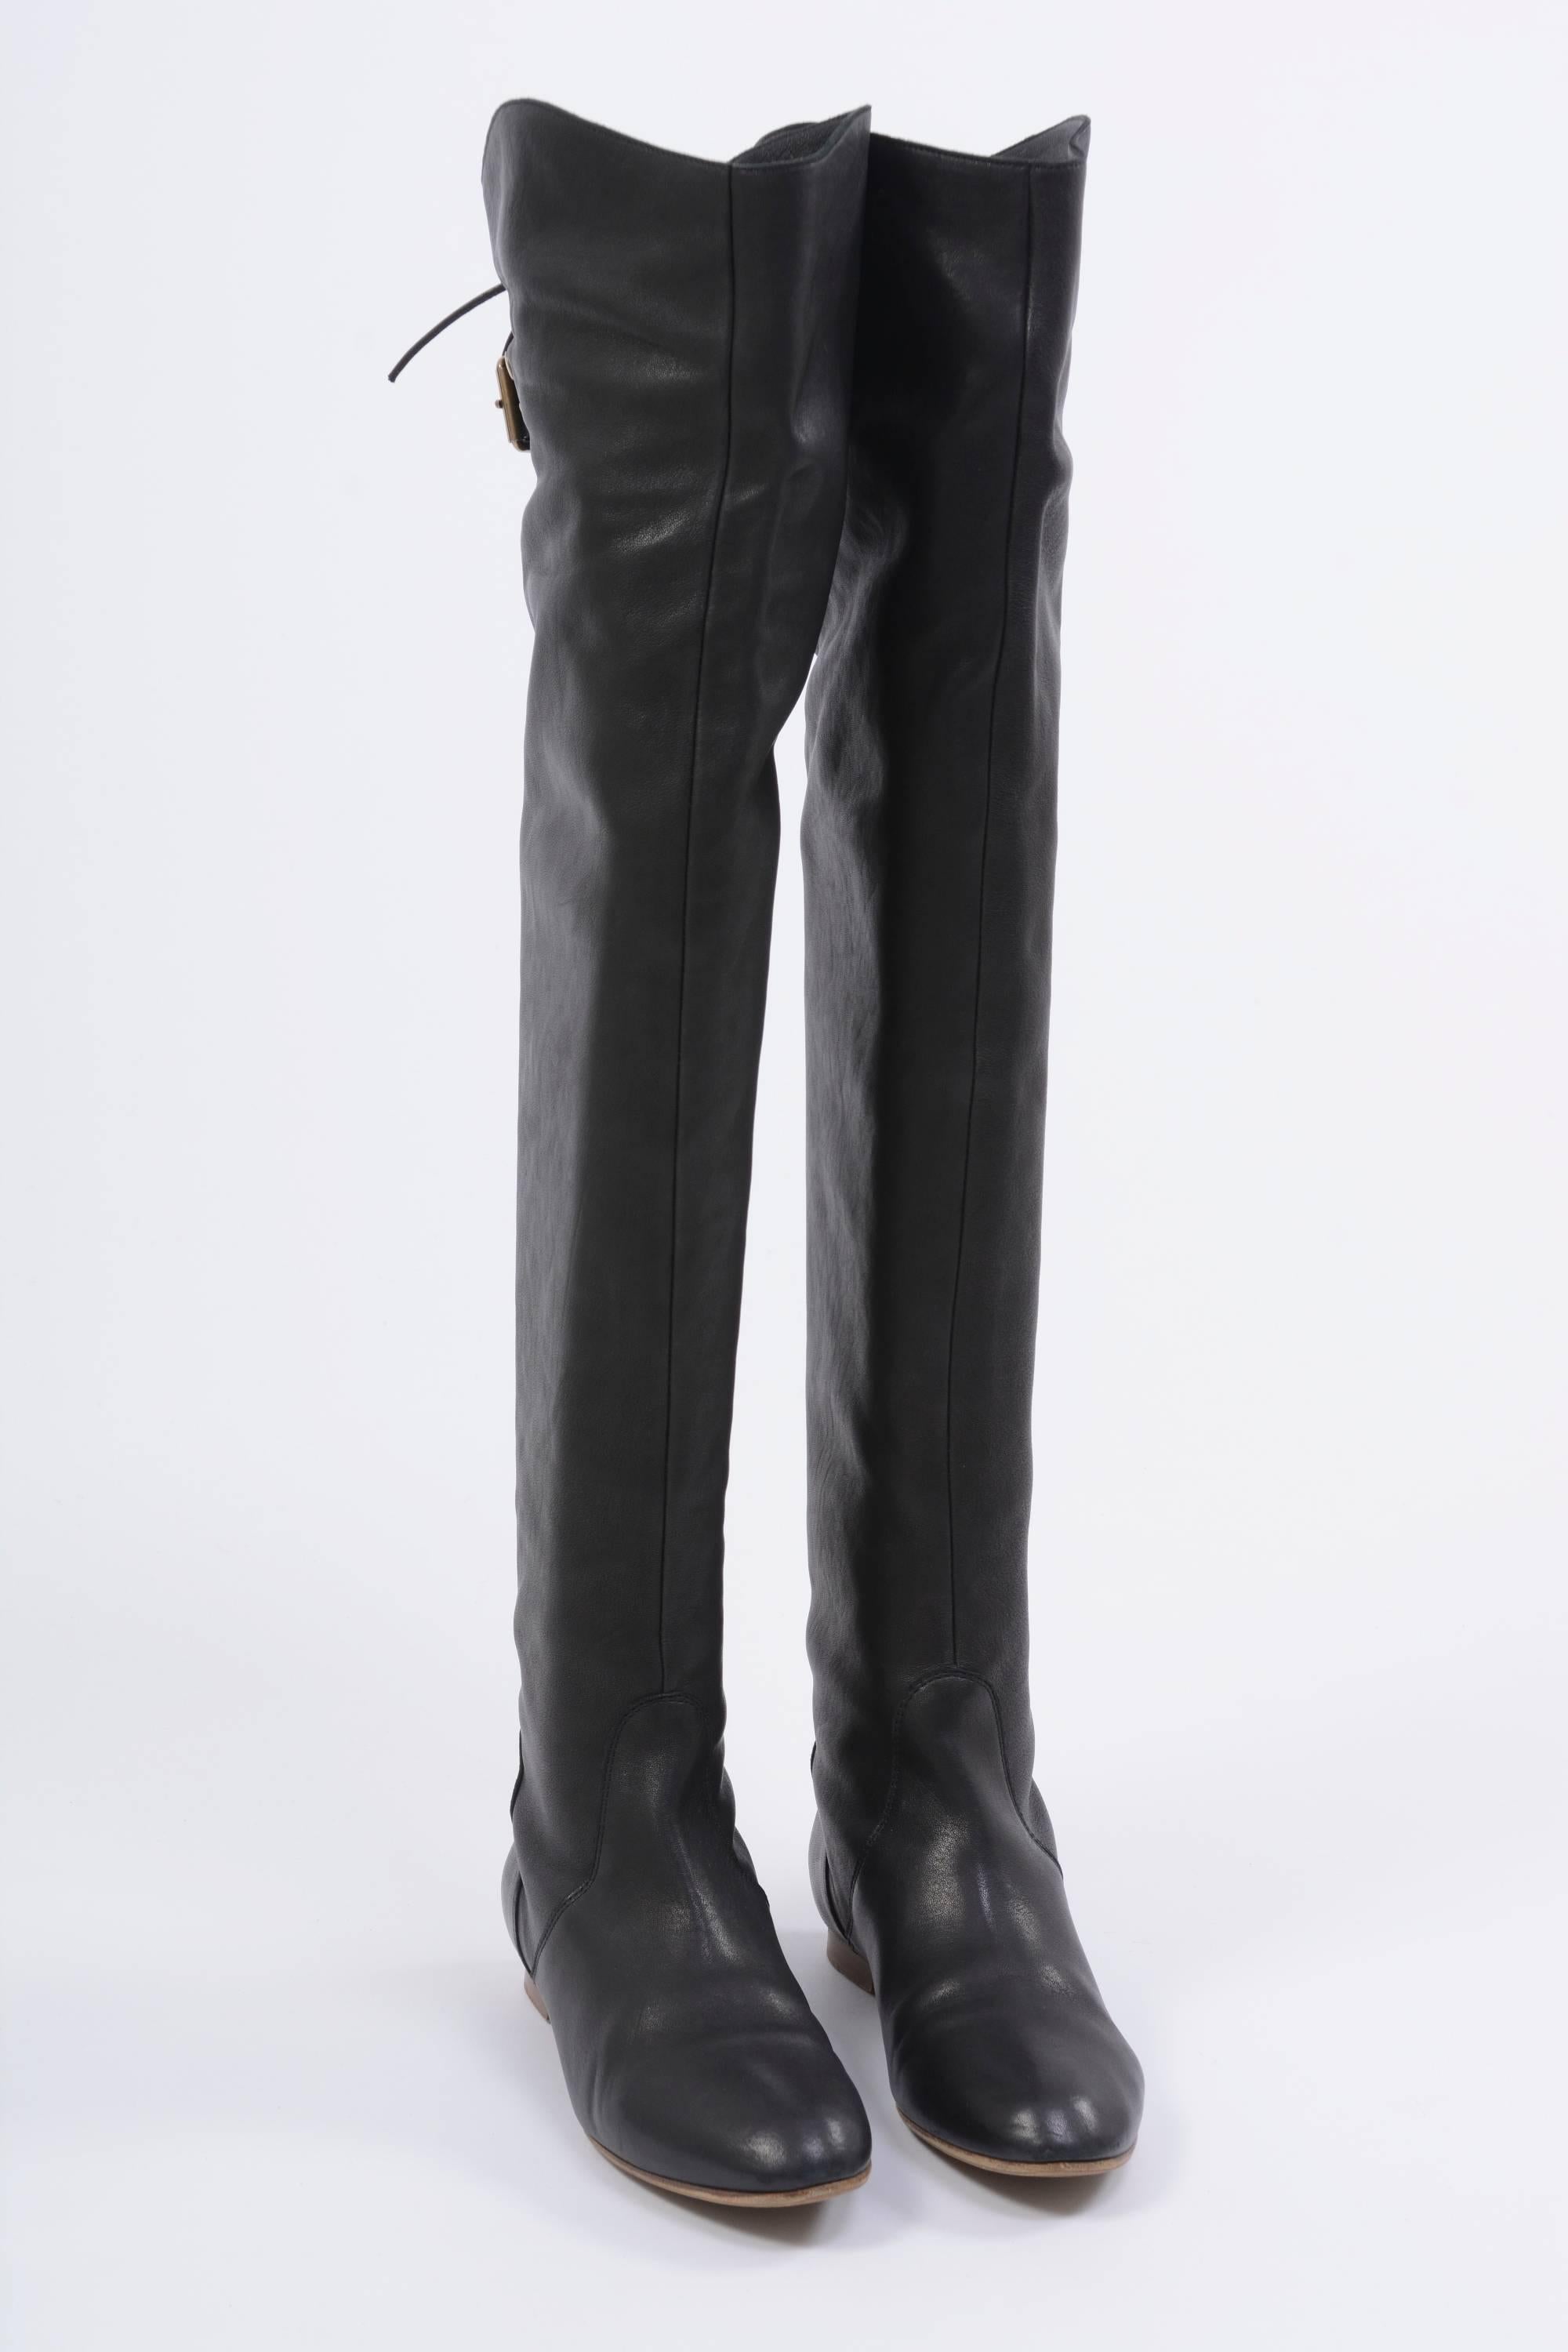 Chloe Black Leather Thigh Flat Boots In Excellent Condition For Sale In Milan, Italy